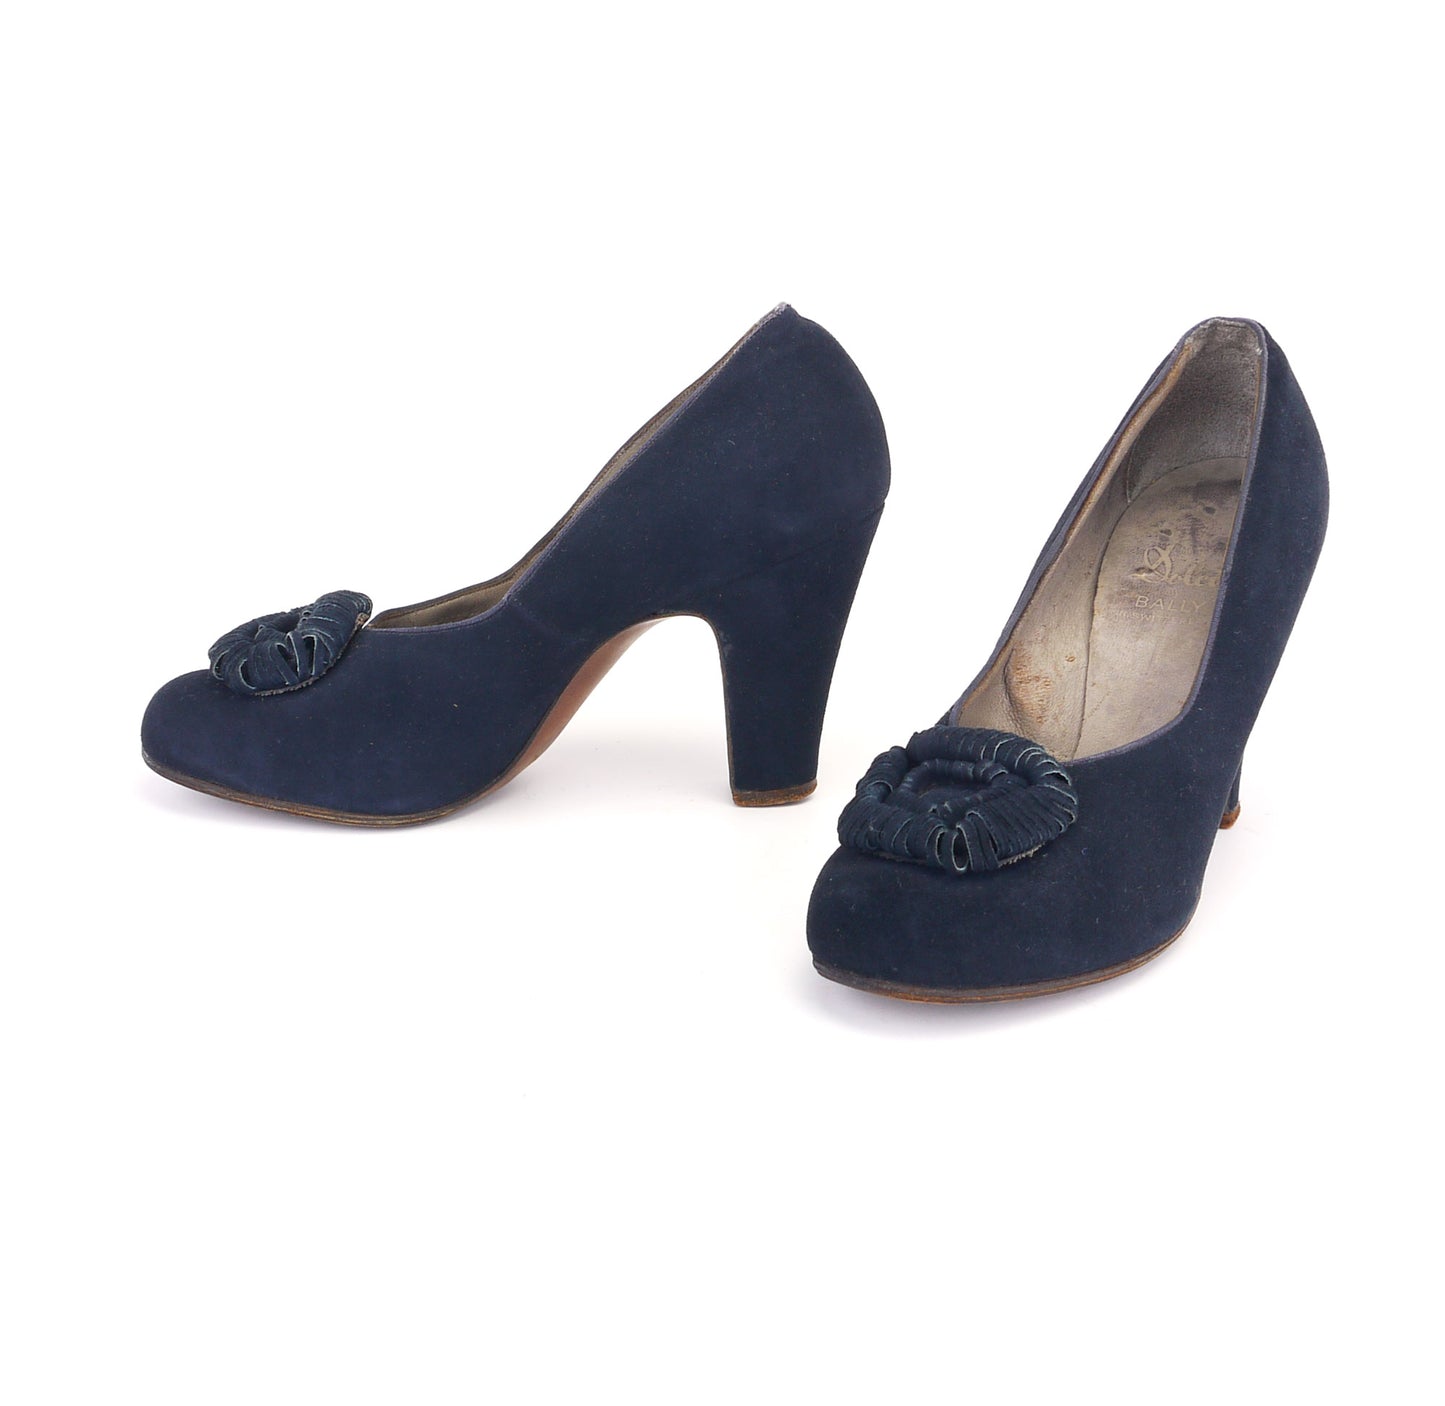 1940s Navy Suede Pumps by Bally for Dolcis UK 1.5